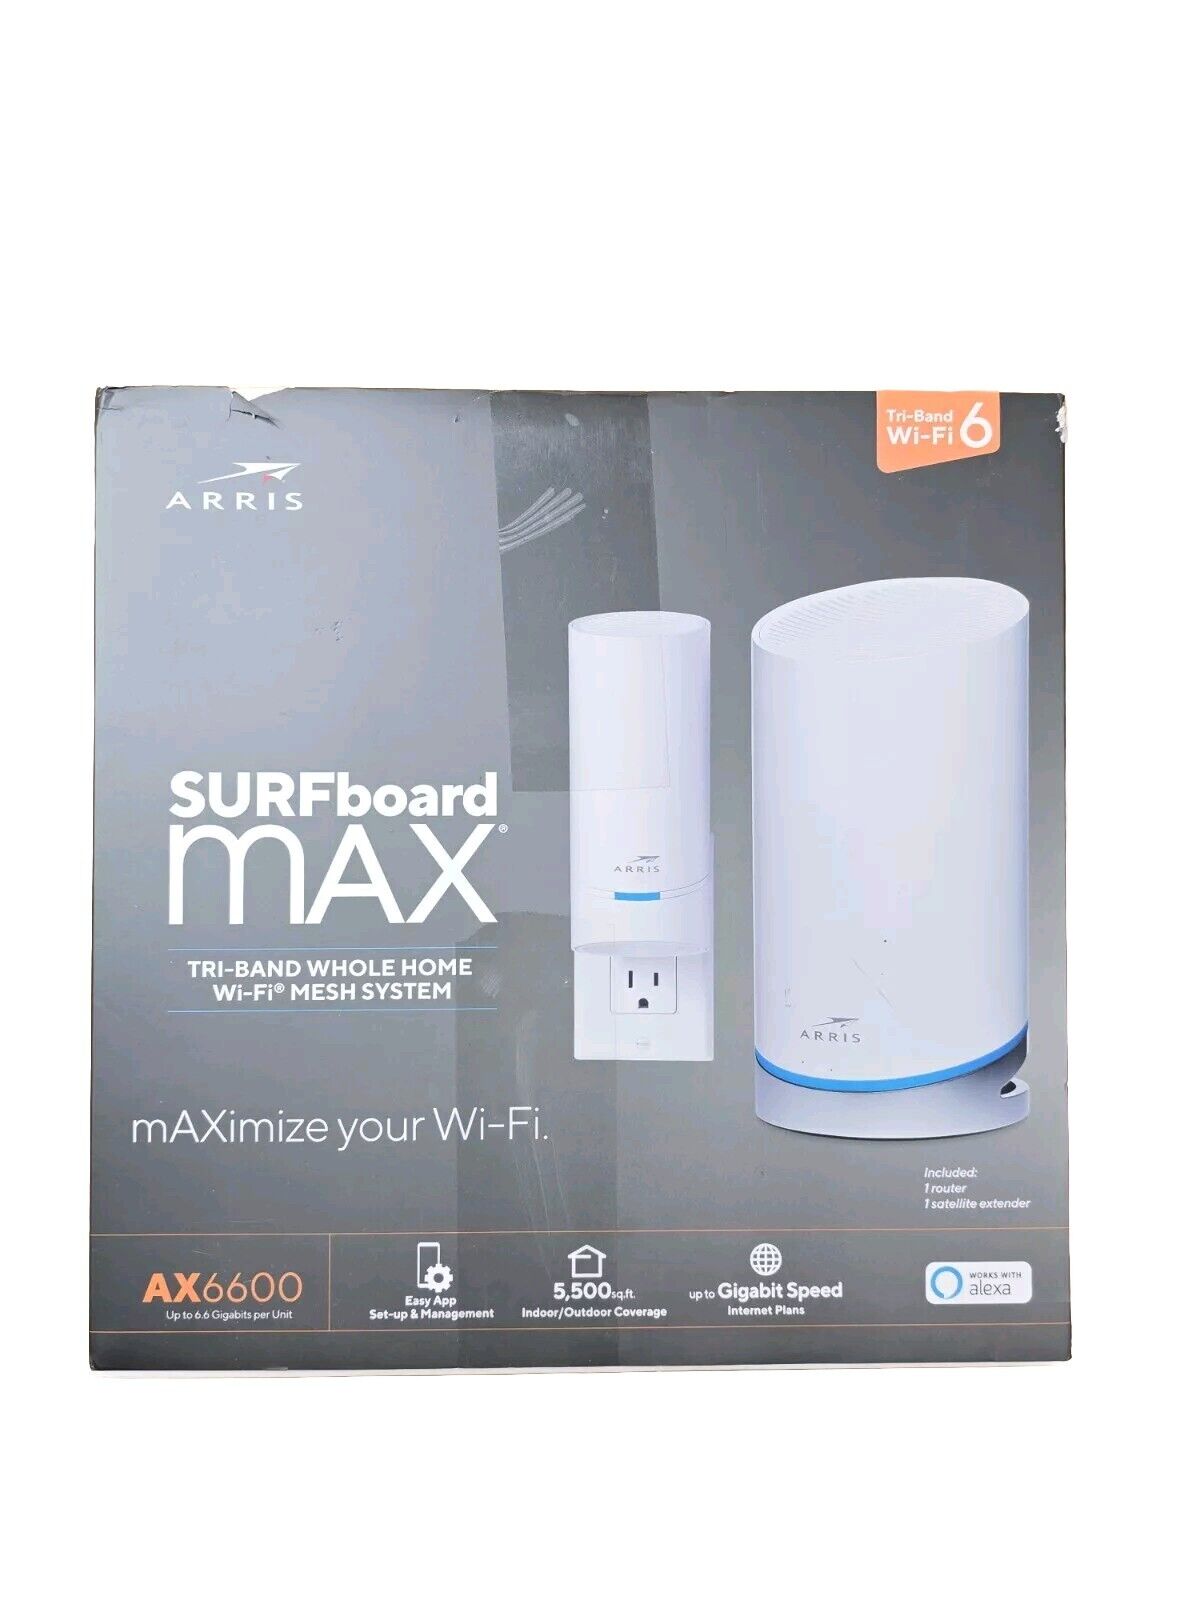 Arris Surfboard mAX W122 Mesh WiFi 6 System Router and Extender  AX6600